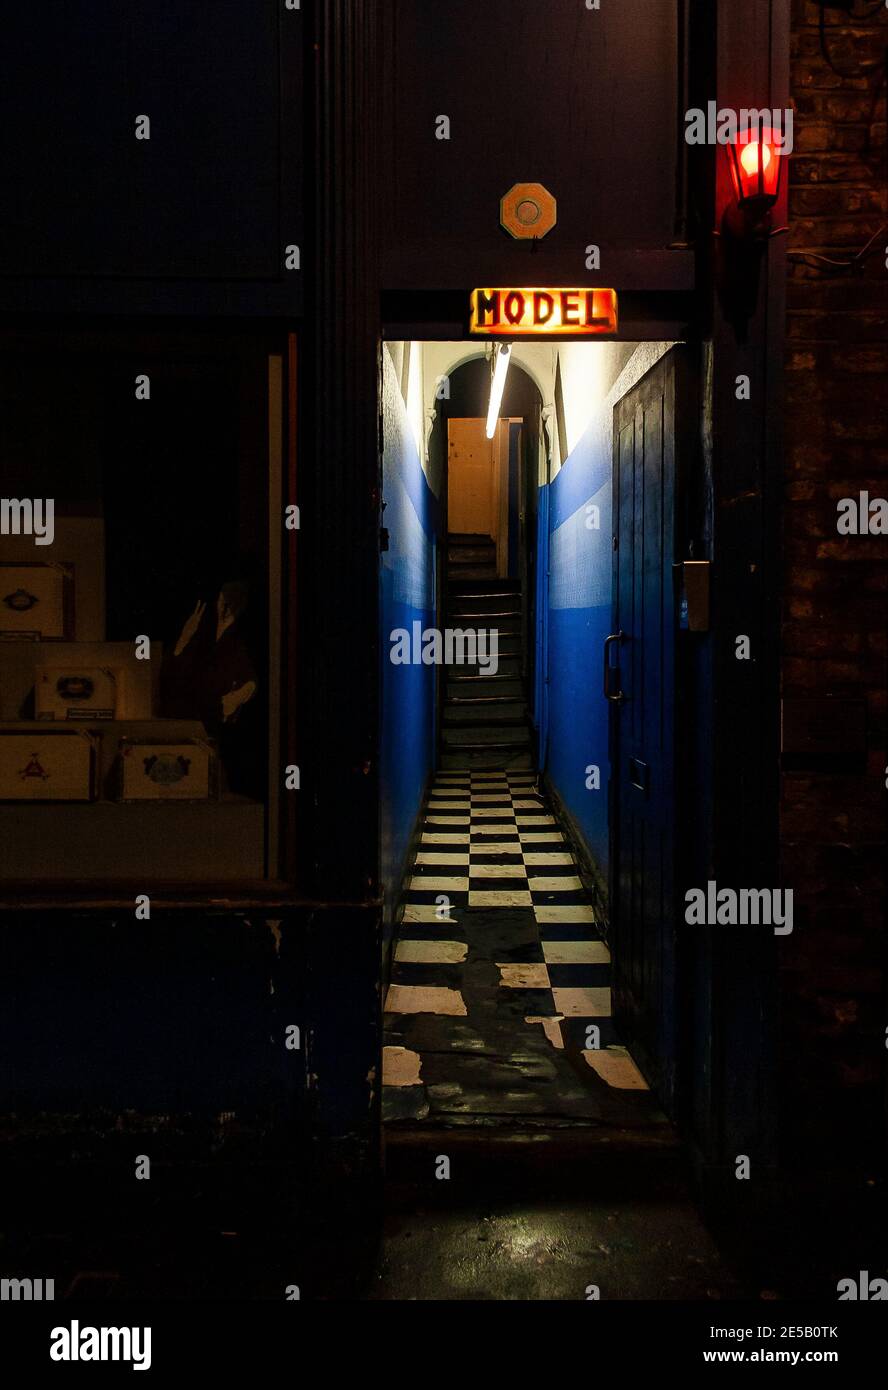 Entrance to a brothel in red light district in Soho London with illuminated signage advertising 'model' Stock Photo